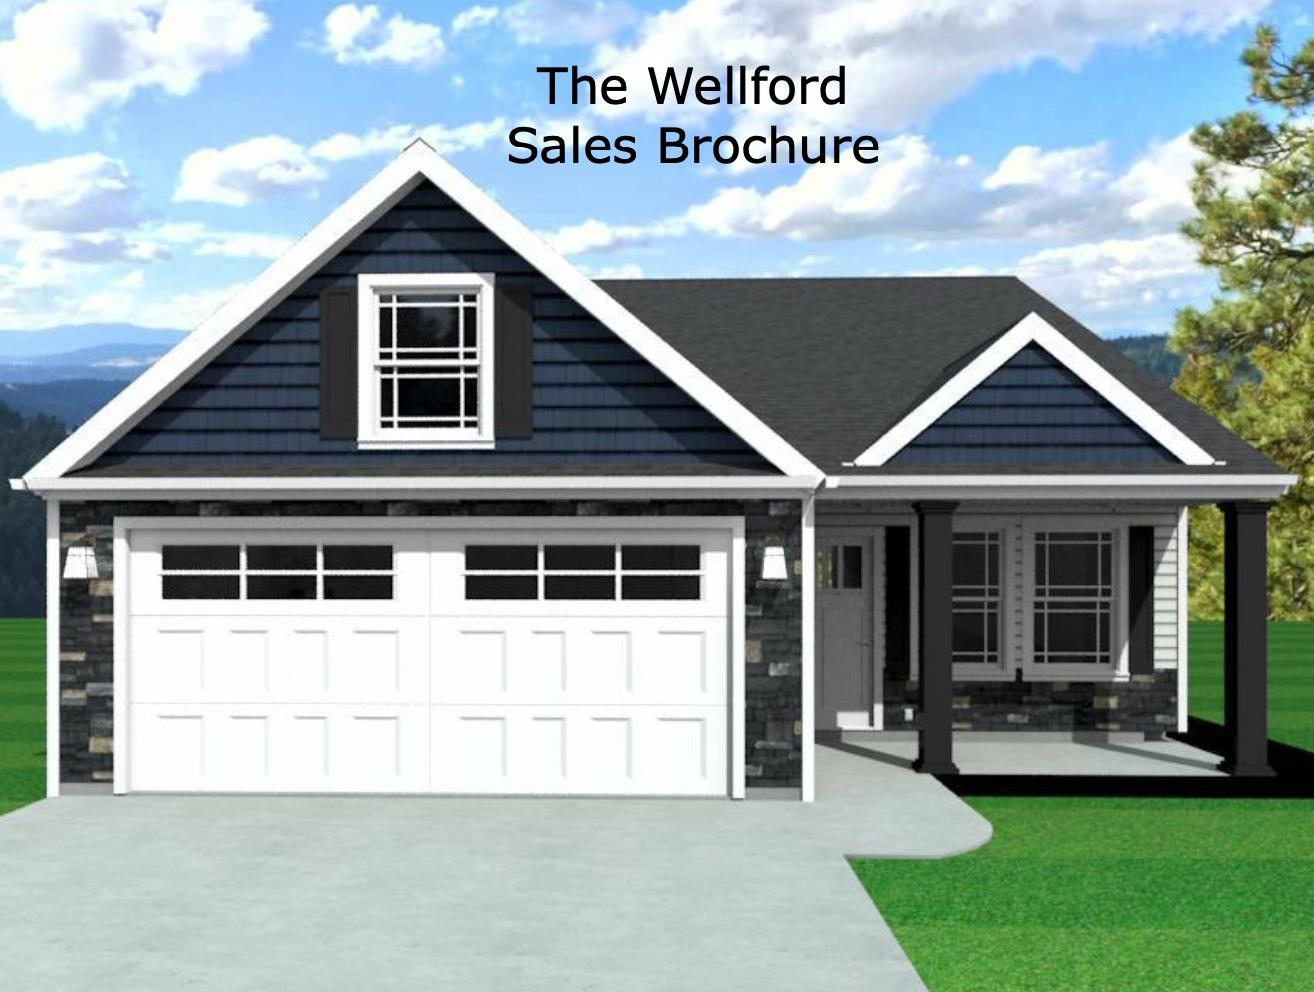 Welcome to Hampshire Heights! The Wellford floor plan is a 3 bedroom, 2 bath. The living space offers a cozy area for the family, while the kitchen/dining combo offers a great area for entertaining. The home is made complete with the trademark chair rail, crown molding and rope lighting.